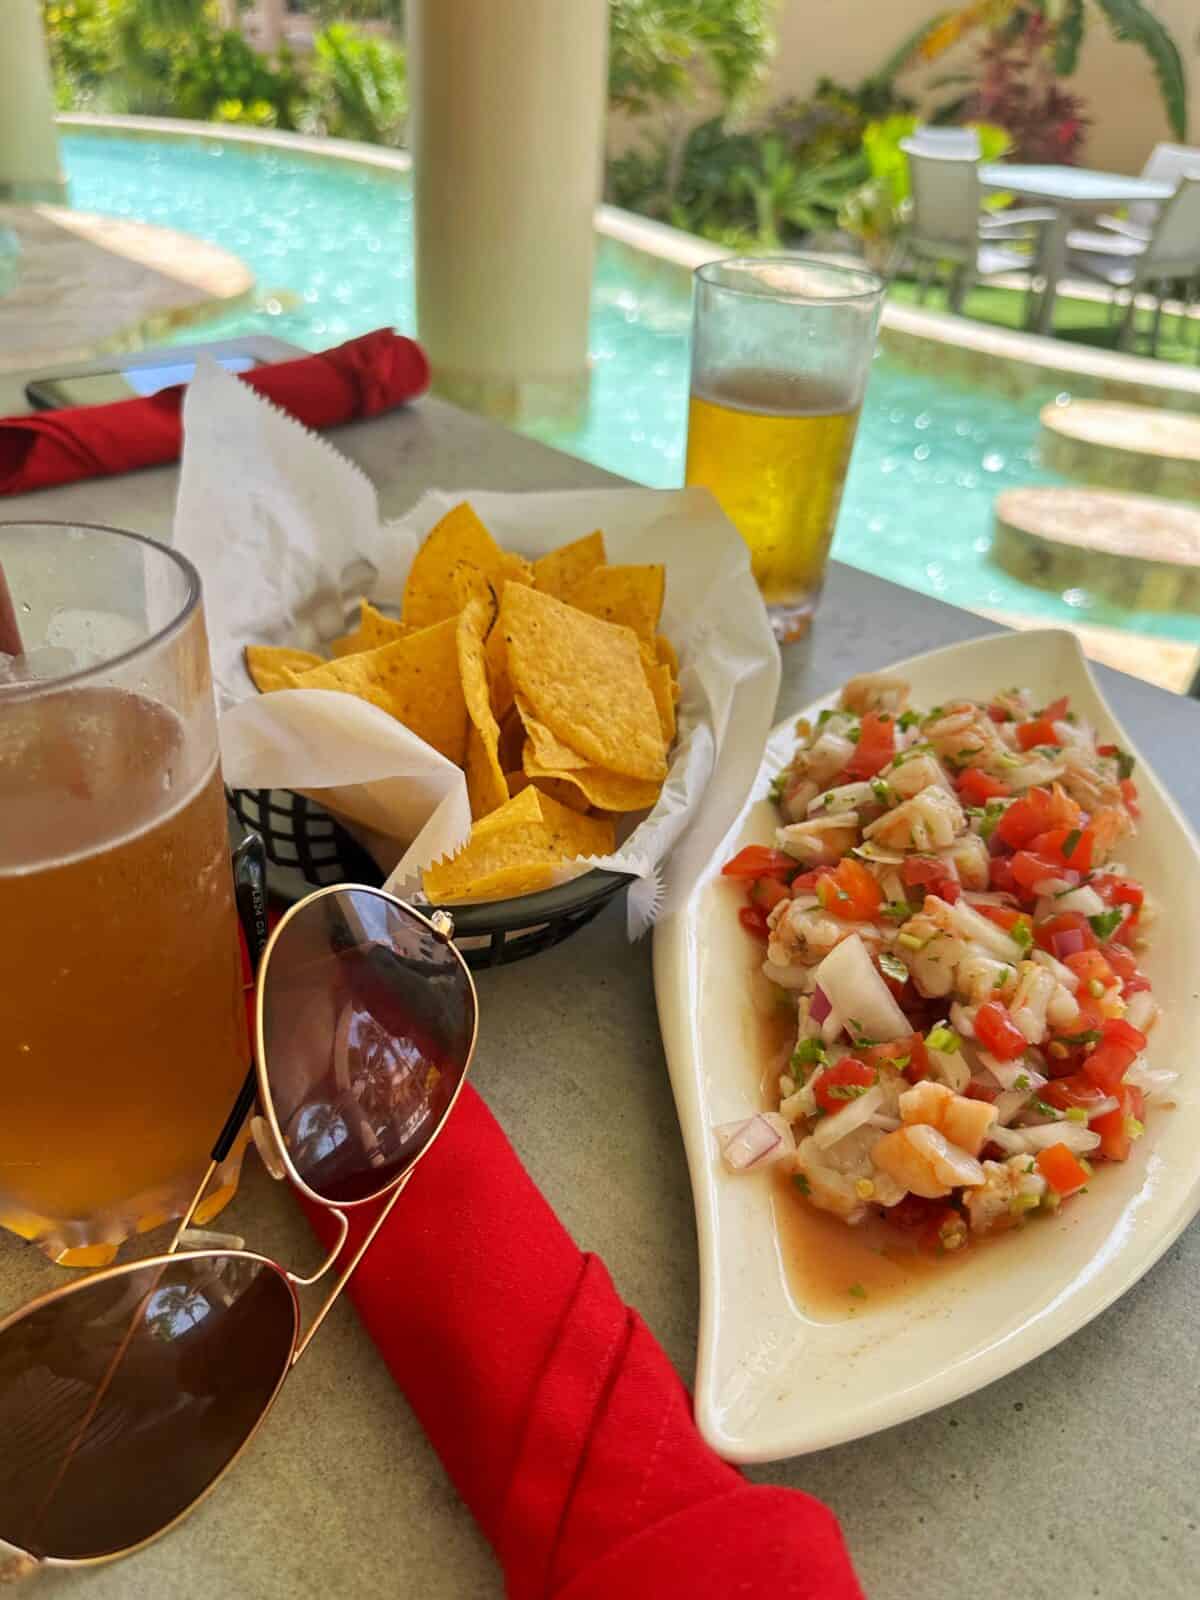 Poolside food and drinks at Coco Beach Resort Belize - shrimp ceviche and beer